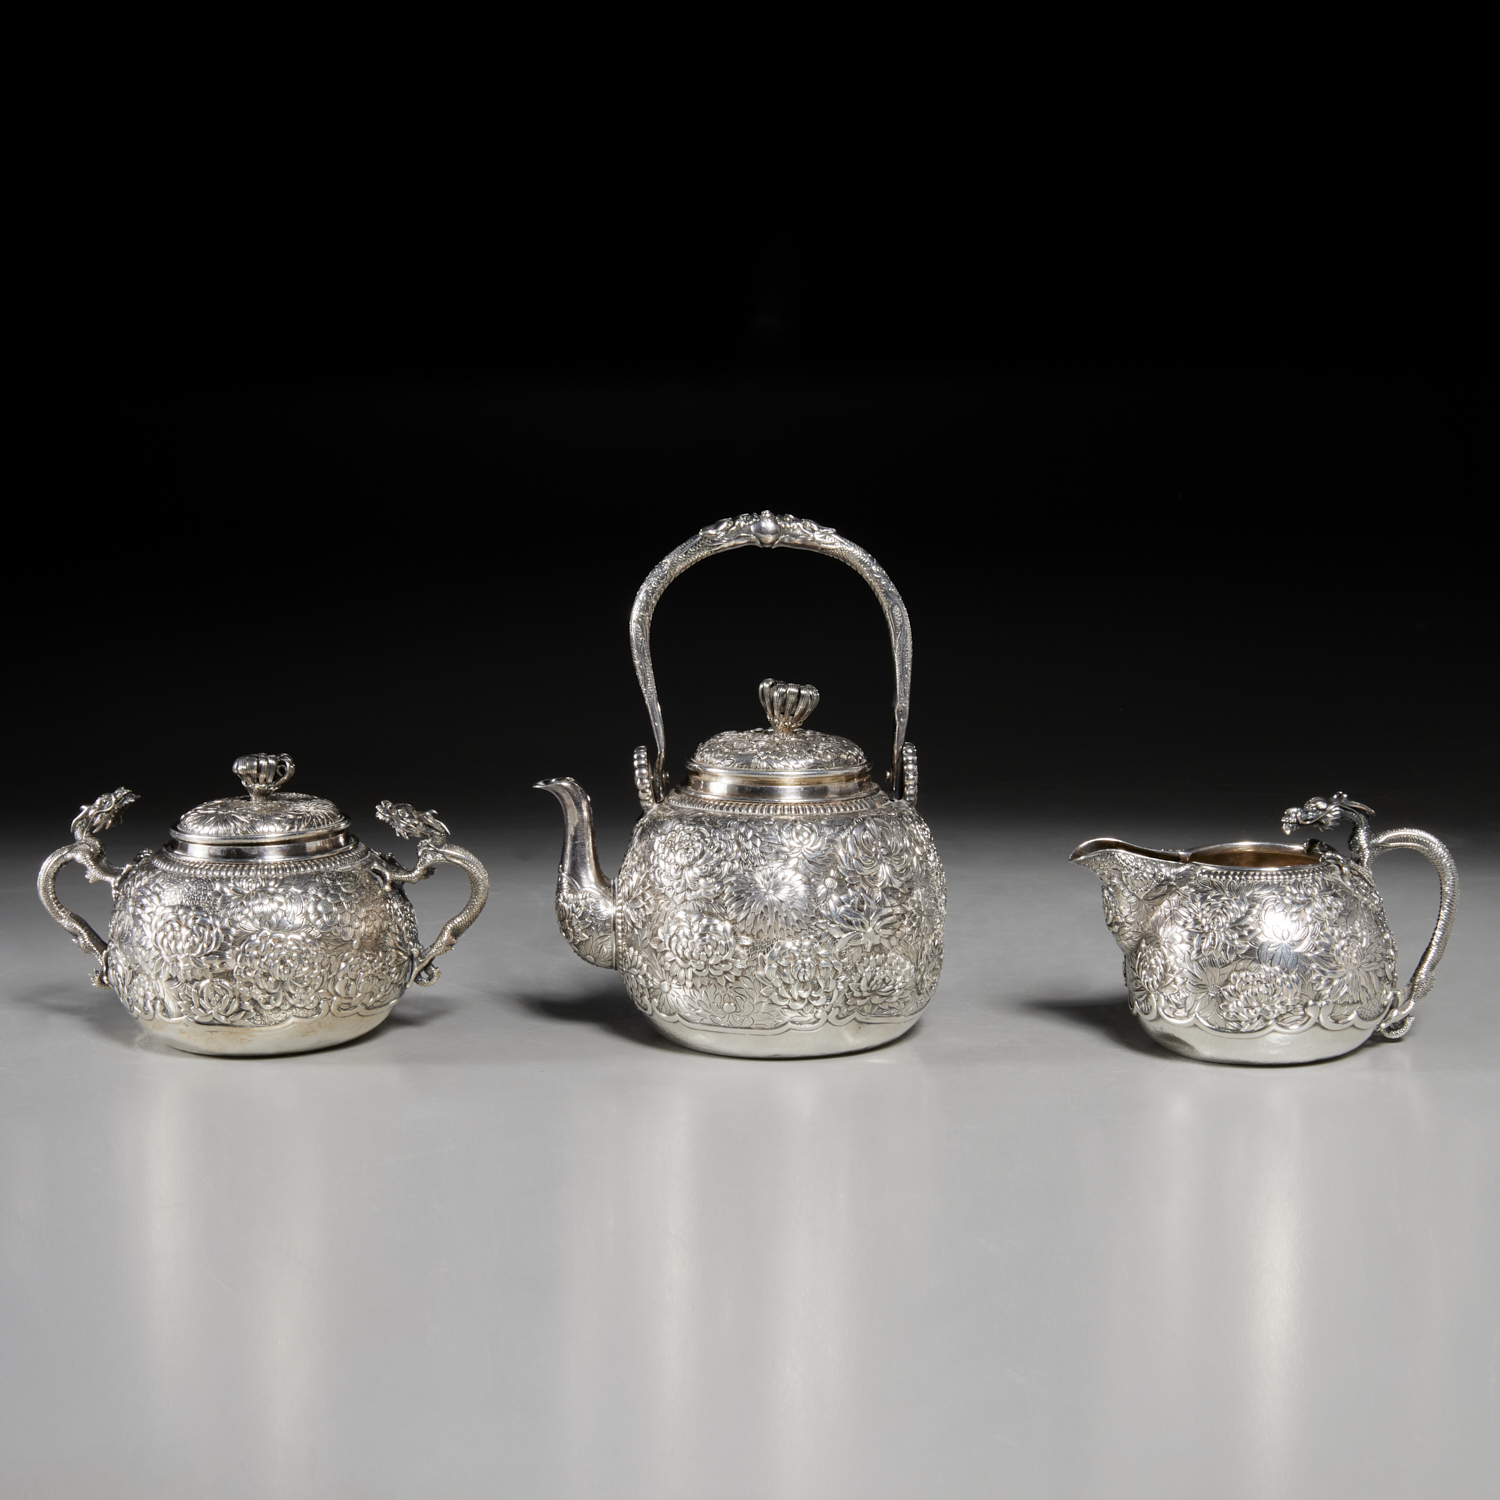 JAPANESE EXPORT 3-PIECE SILVER